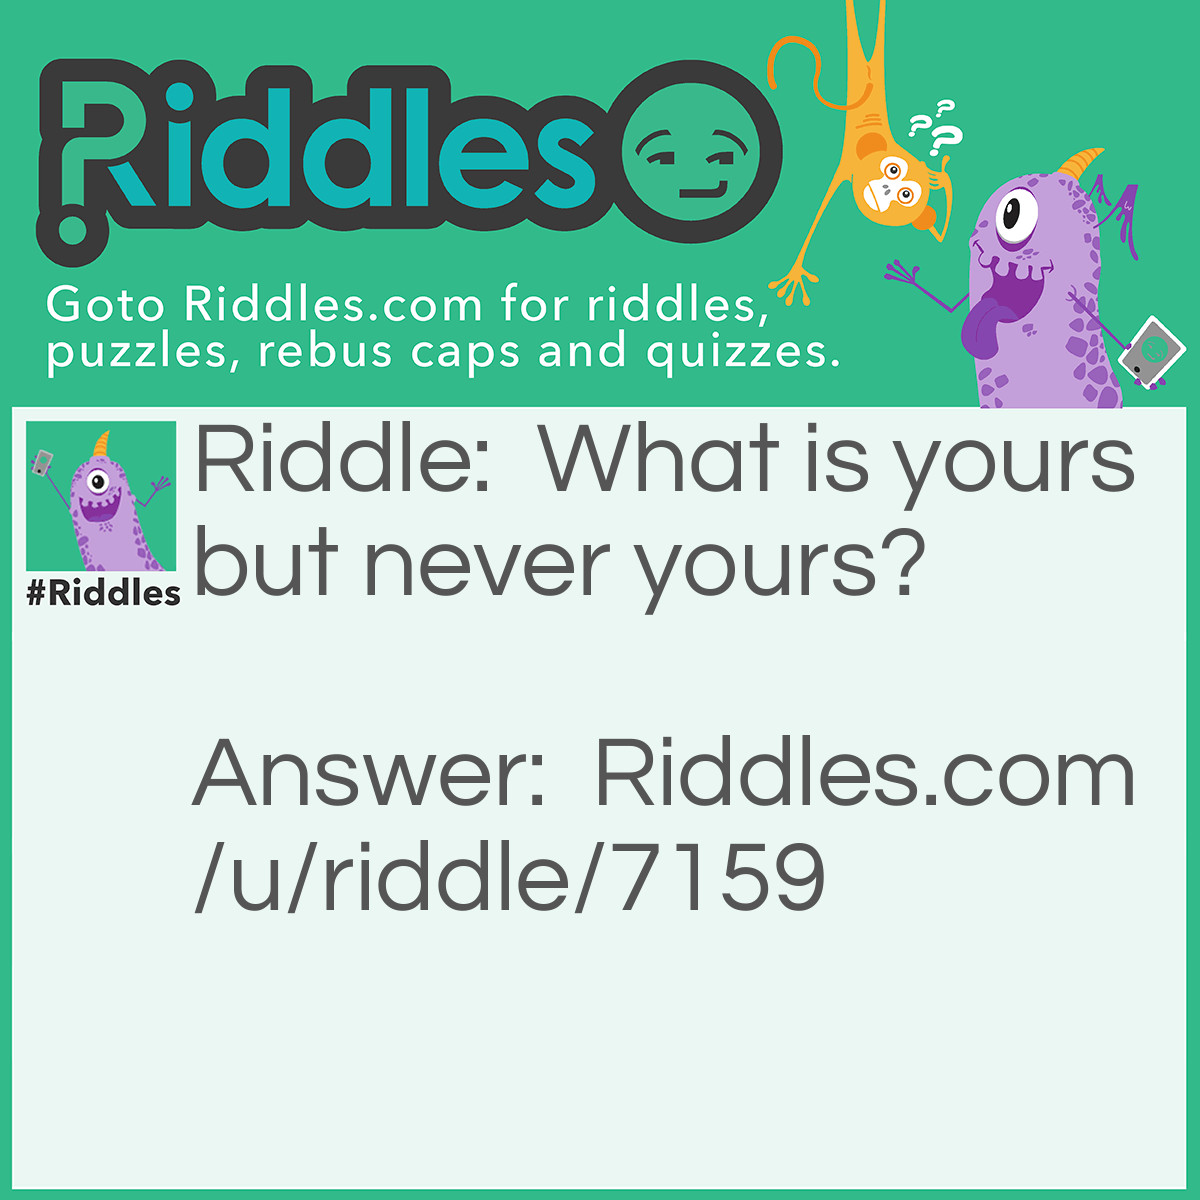 Riddle: What is yours but never yours? Answer: A Gift.